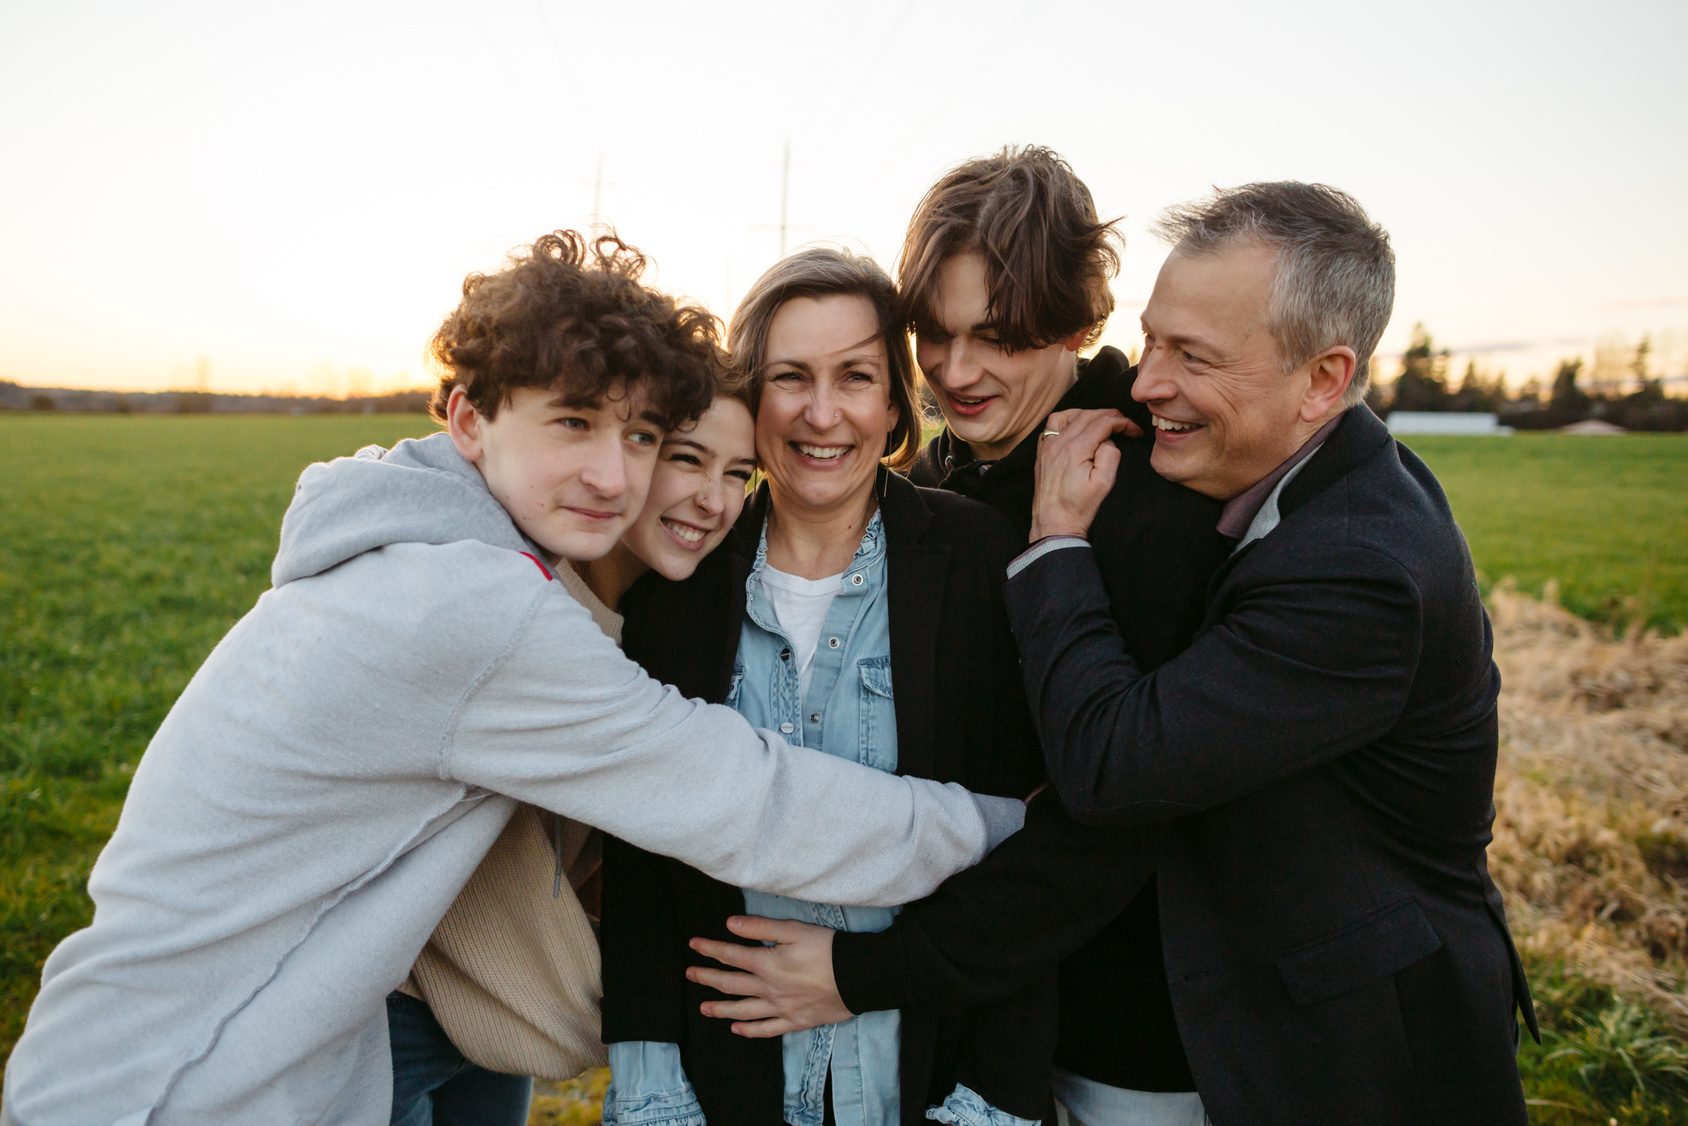 family laughing and hugging - family addiction treatment concept